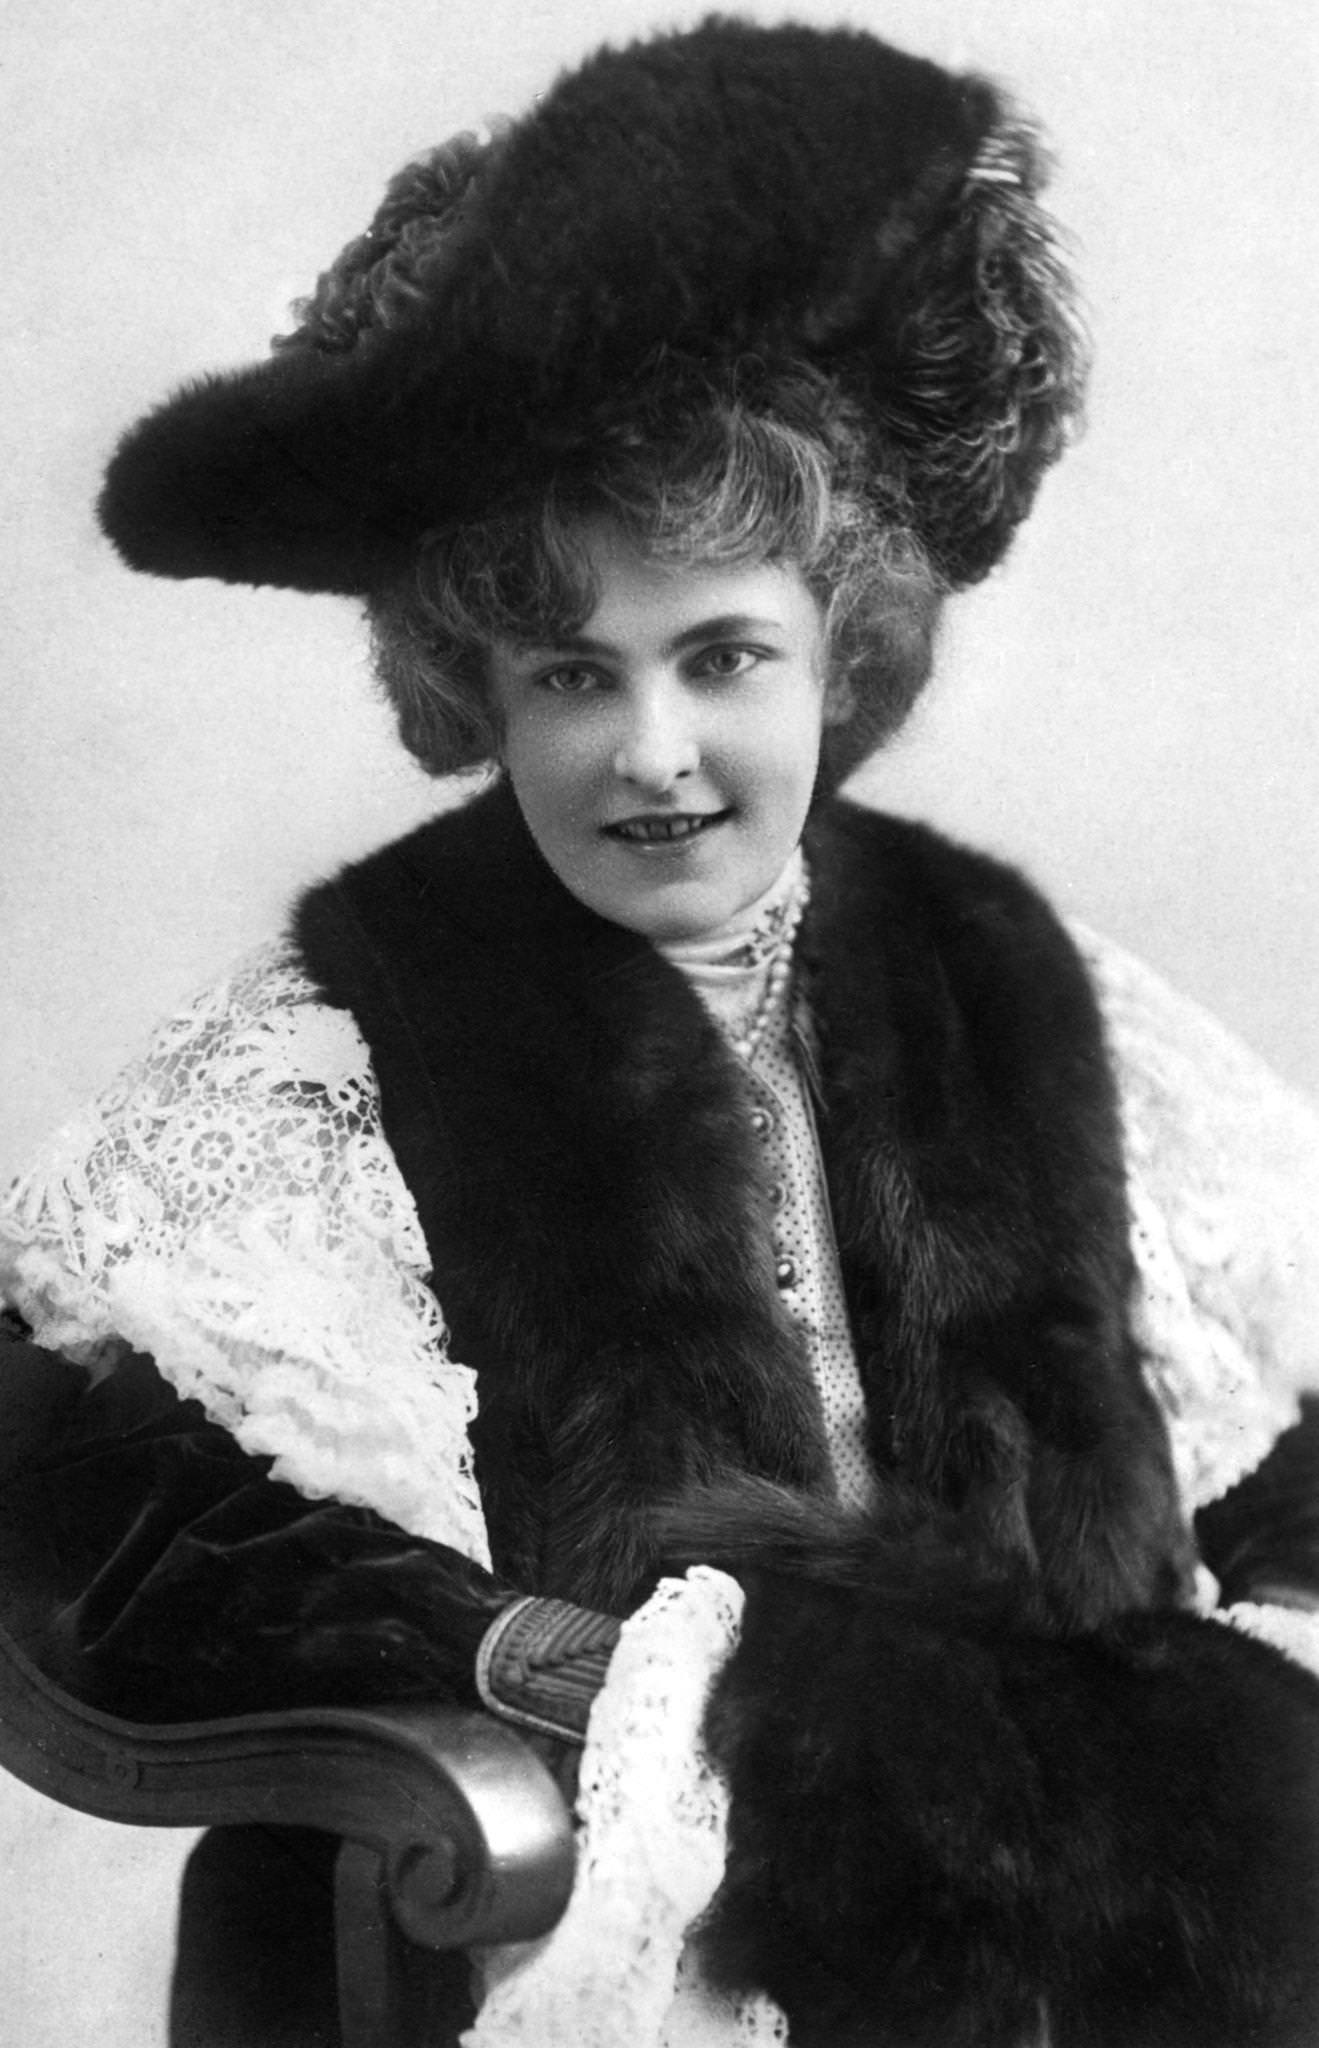 Madge Lessing looking chic in her fashionable hat